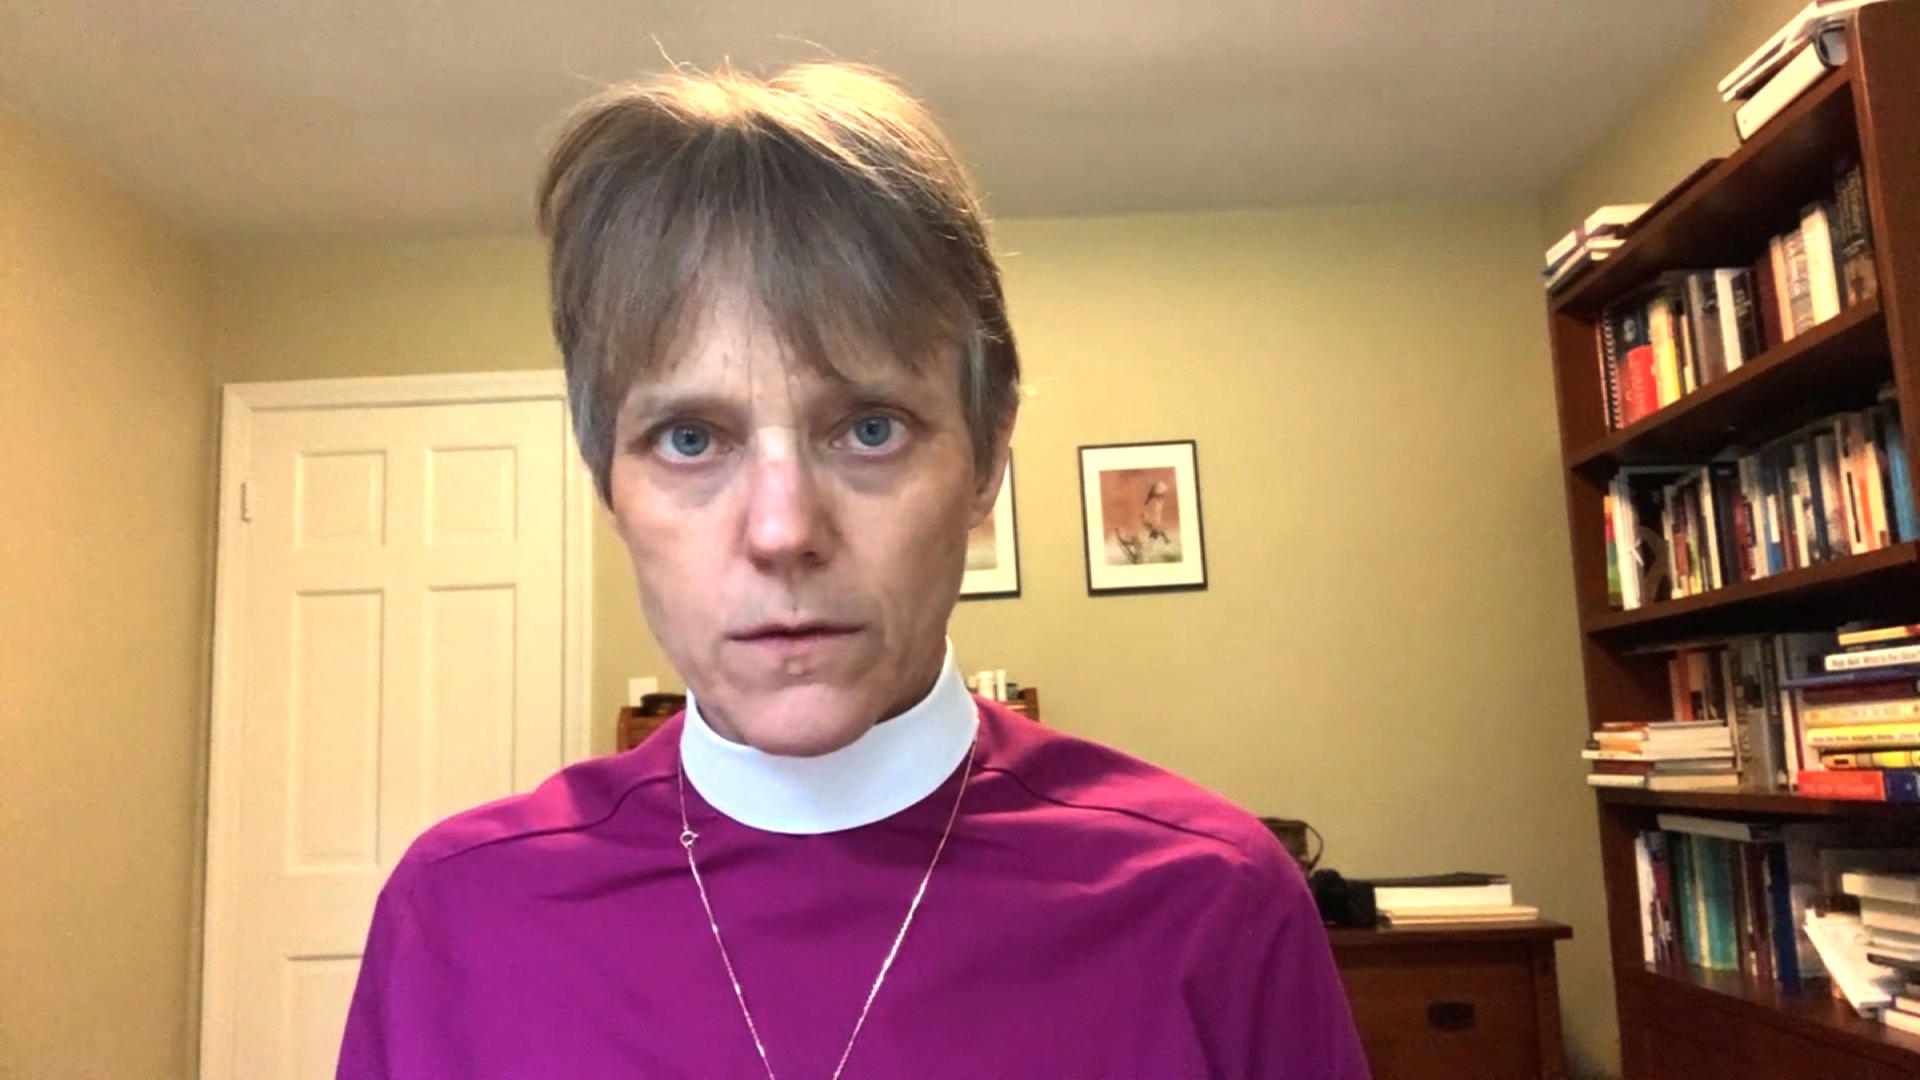 Bishop Mariann Edgar Budde of the Episcopal Diocese of Washington, DC, is interviewed on CNN's "New Day" on June 2.